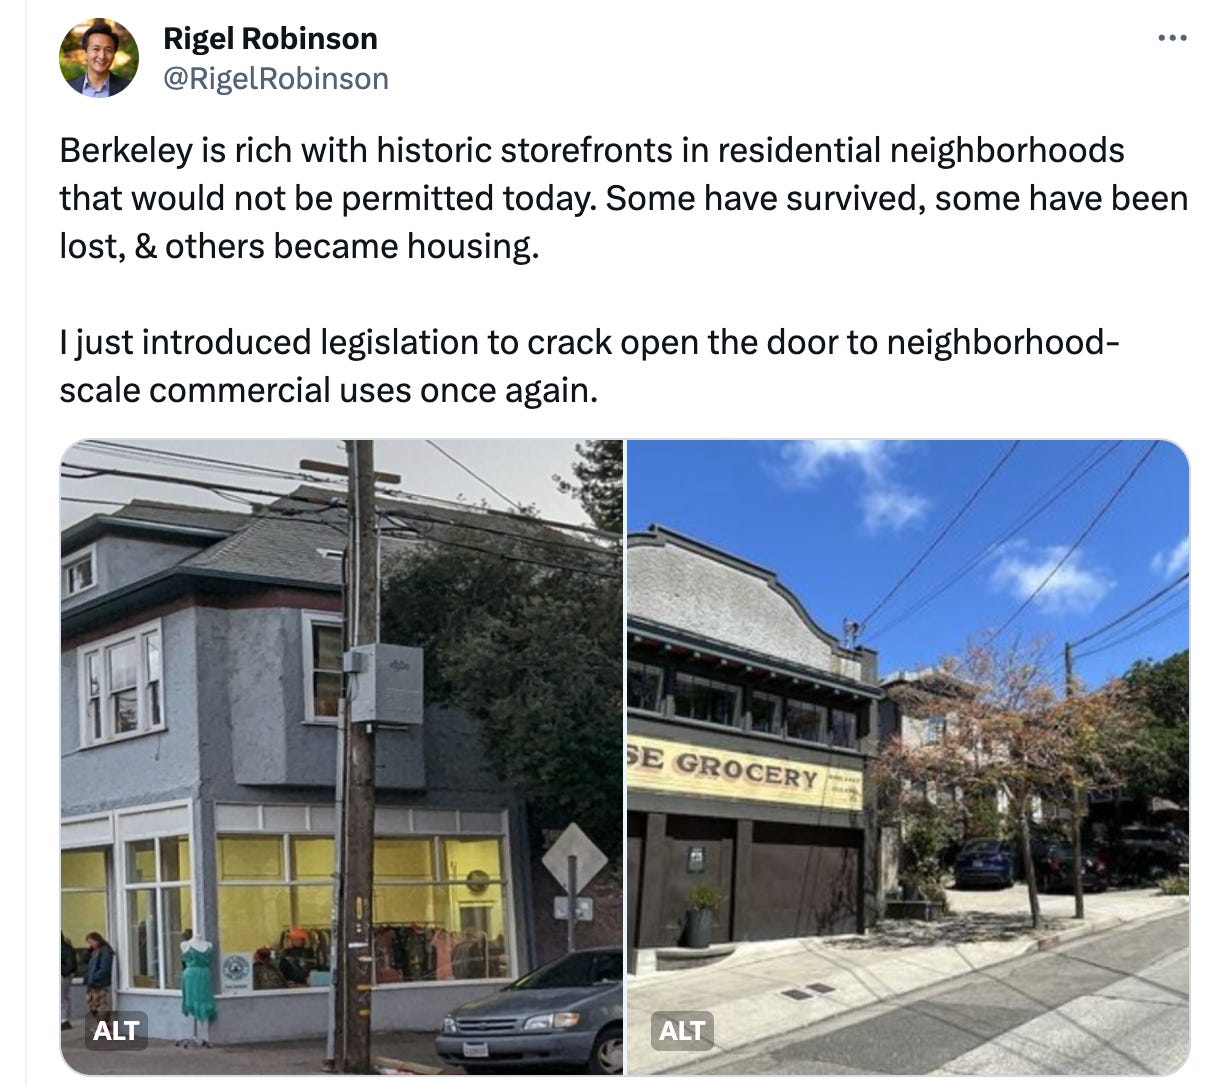  See new posts Conversation Rigel Robinson @RigelRobinson Berkeley is rich with historic storefronts in residential neighborhoods that would not be permitted today. Some have survived, some have been lost, & others became housing.  I just introduced legislation to crack open the door to neighborhood-scale commercial uses once again.